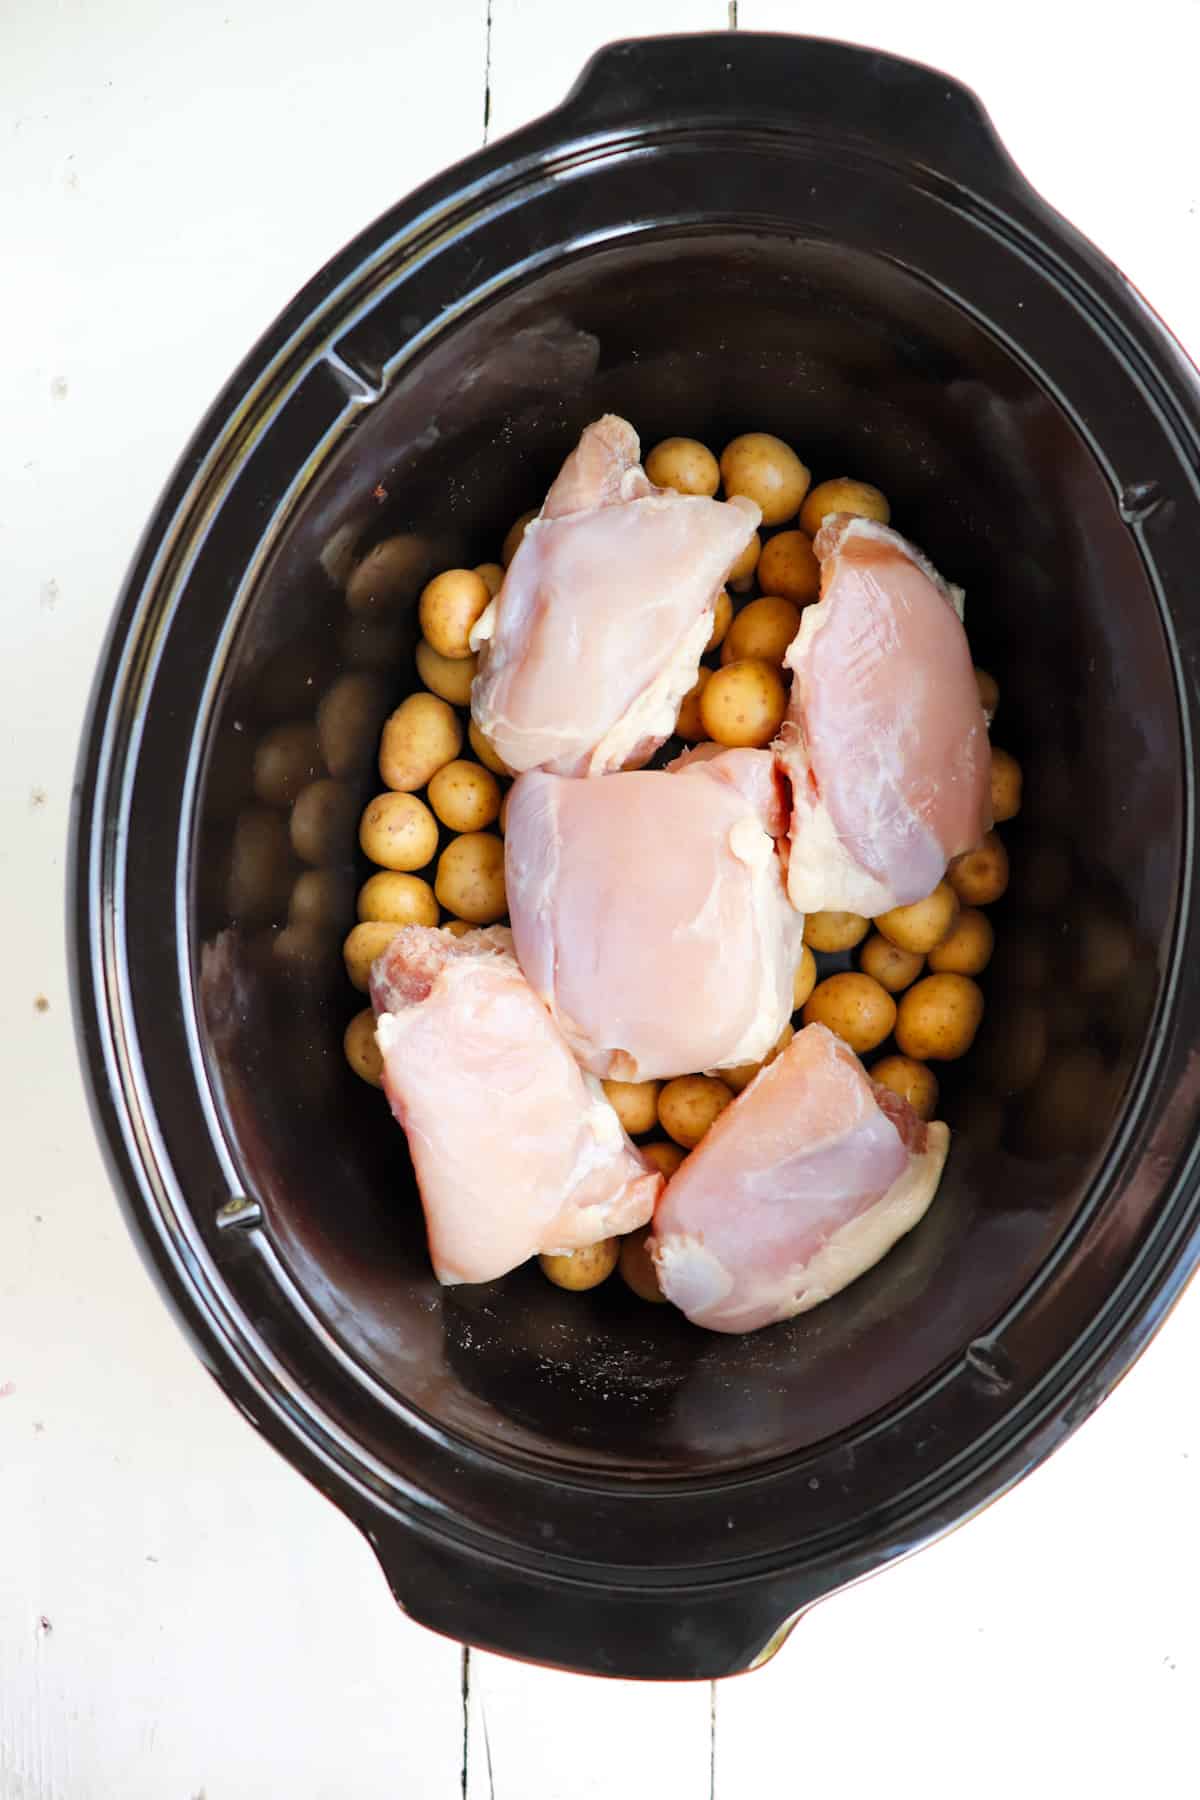 chicken thighs placed on layer of baby potatoes in a black slow cooker.